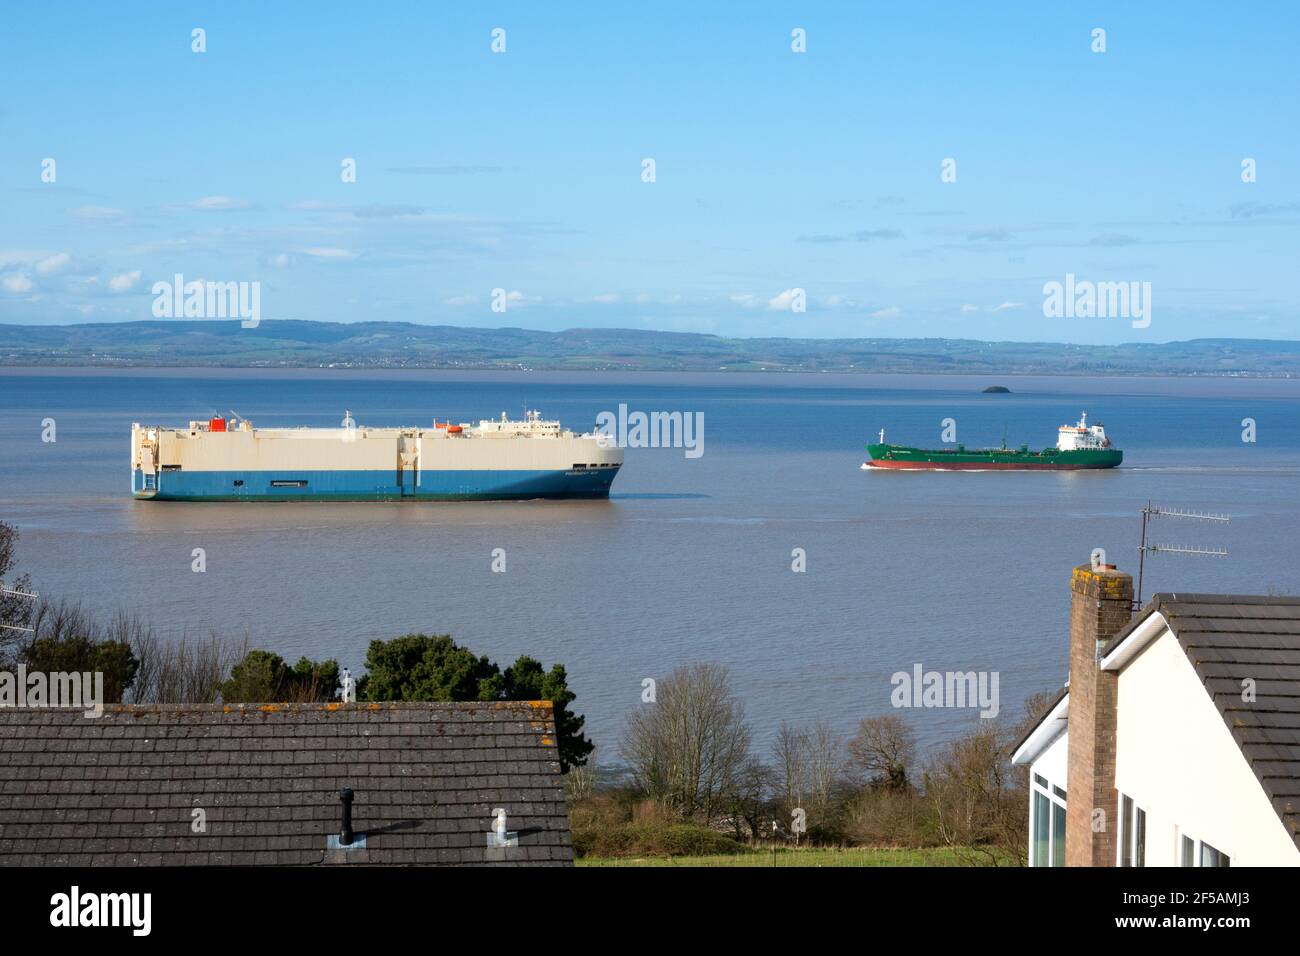 Two ships passing in the Severn estuary off Portishead, UK as the estuary reaches high tide. The ships are using The Royal Portbury dock Stock Photo